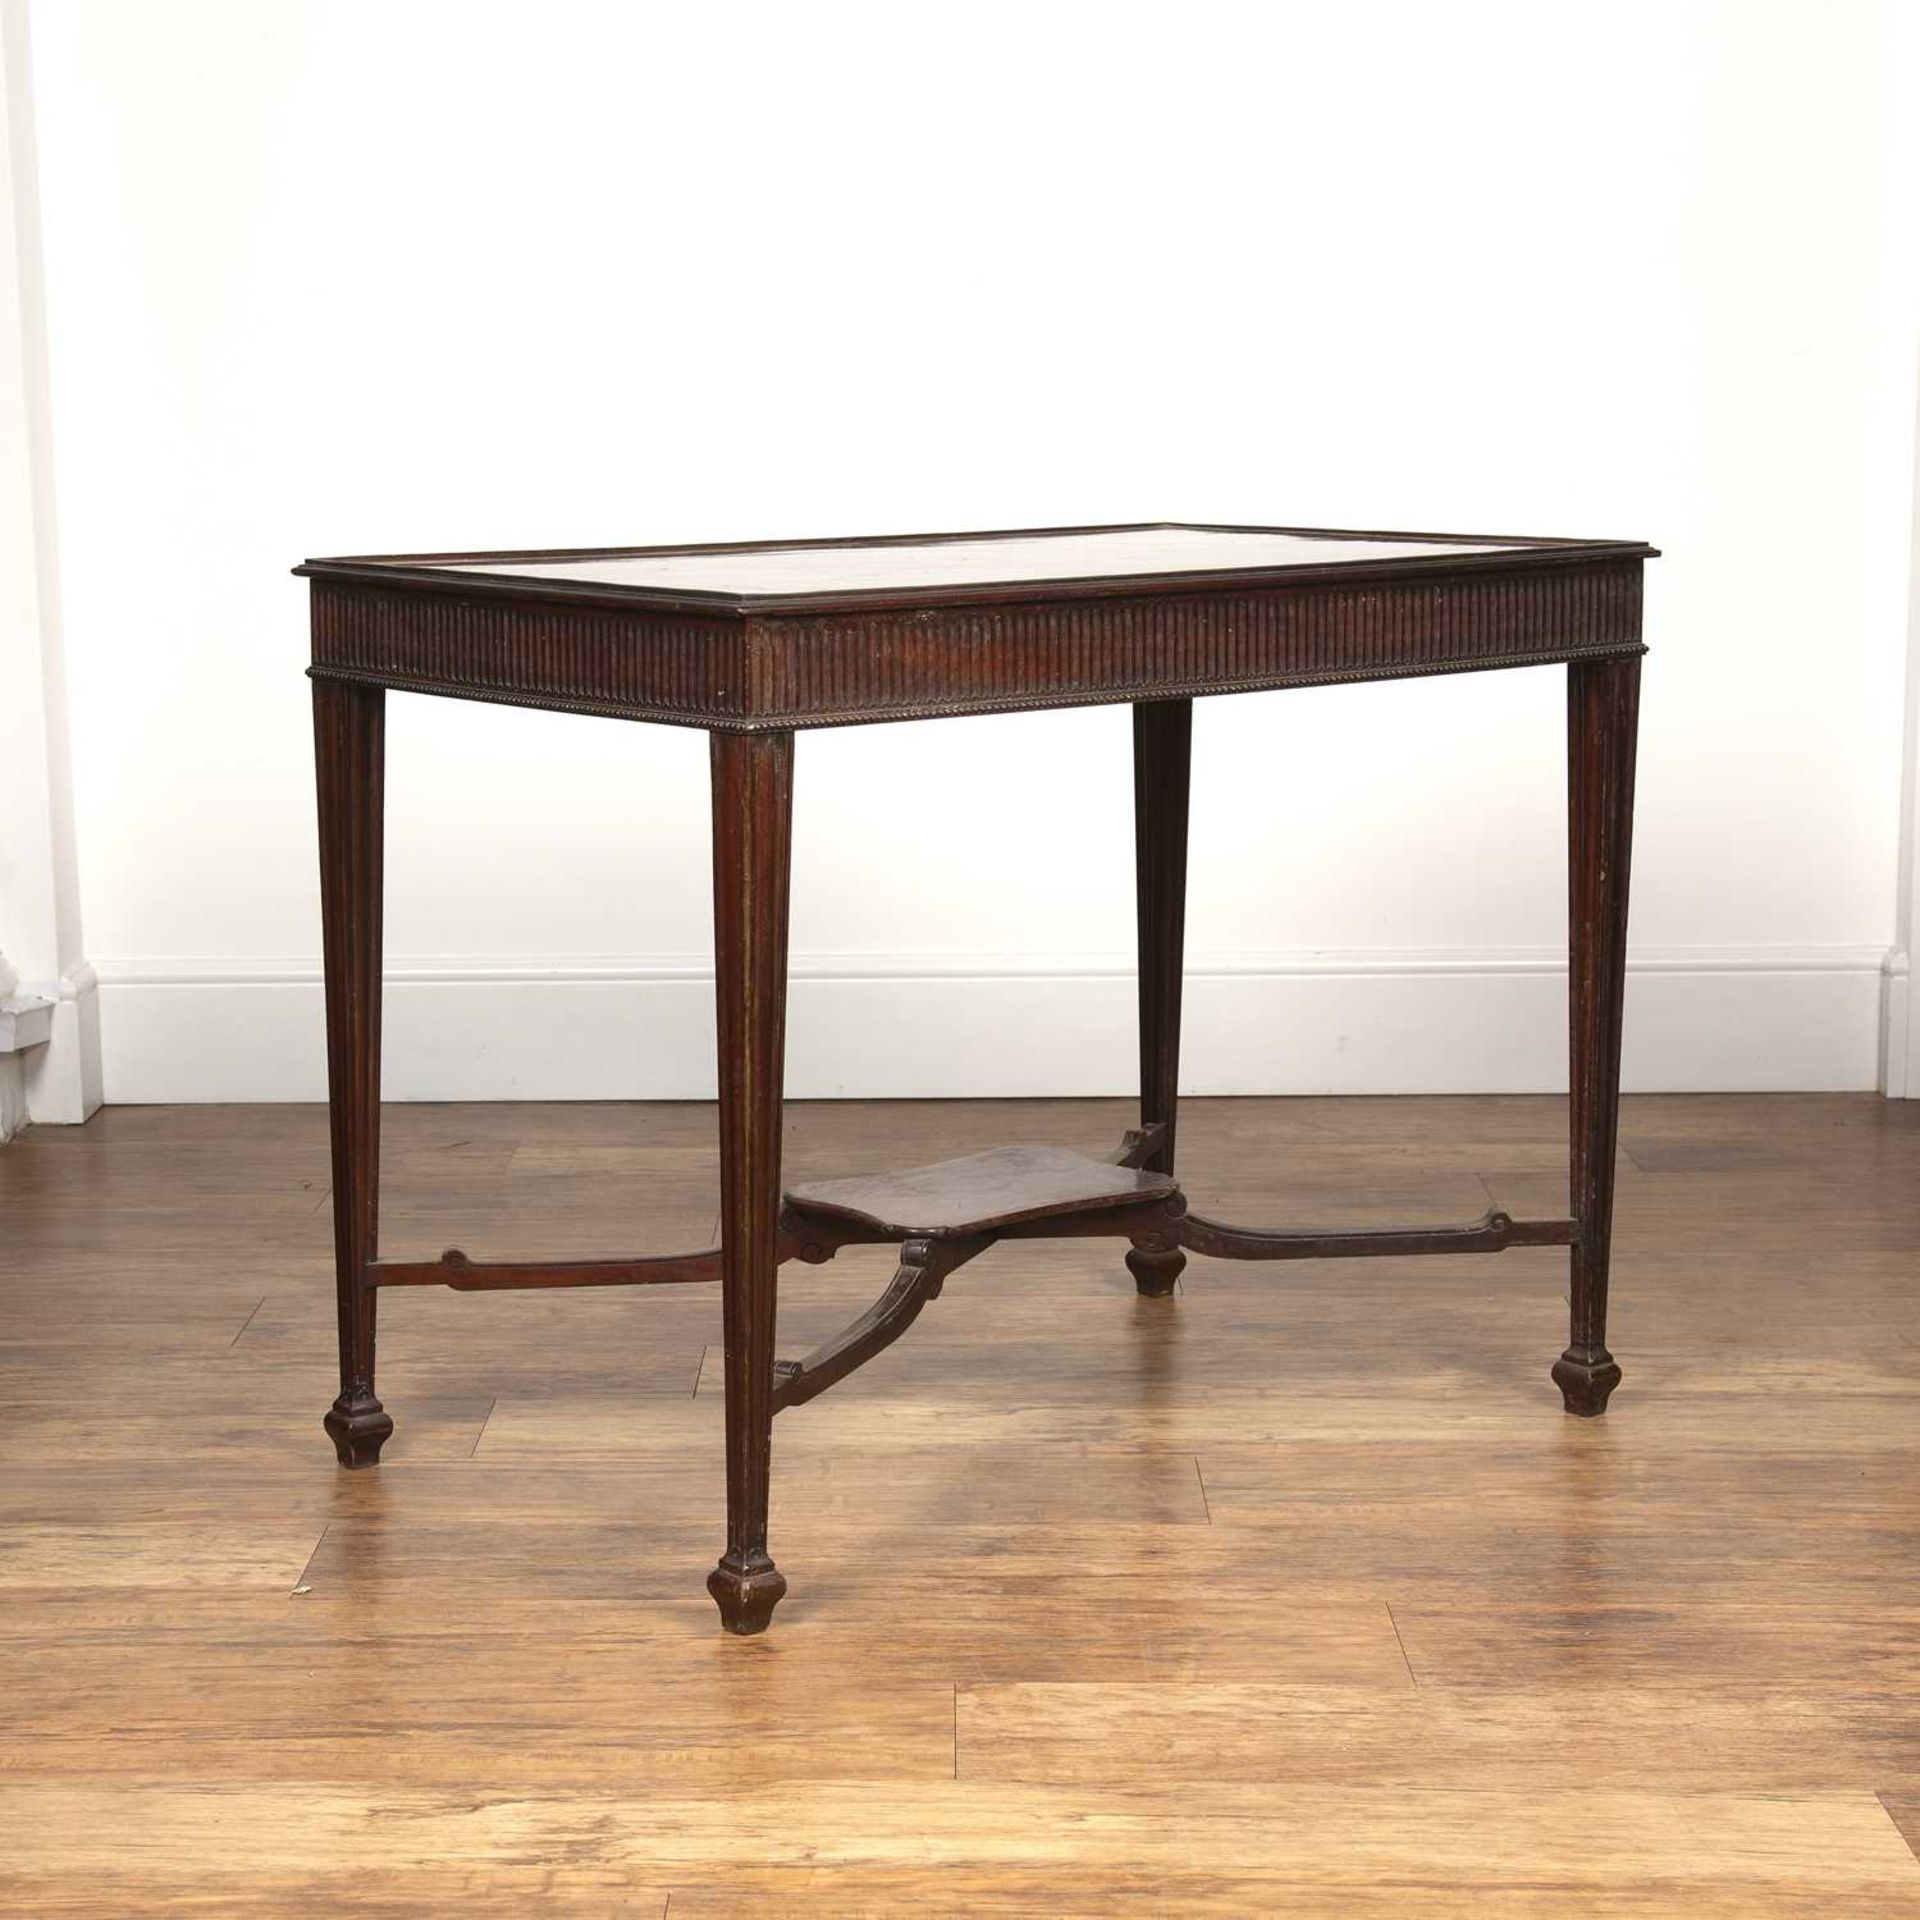 In the style of Thomas Chippendale (1718-1779) mahogany, silver or centre table, with shaped edges - Image 2 of 4